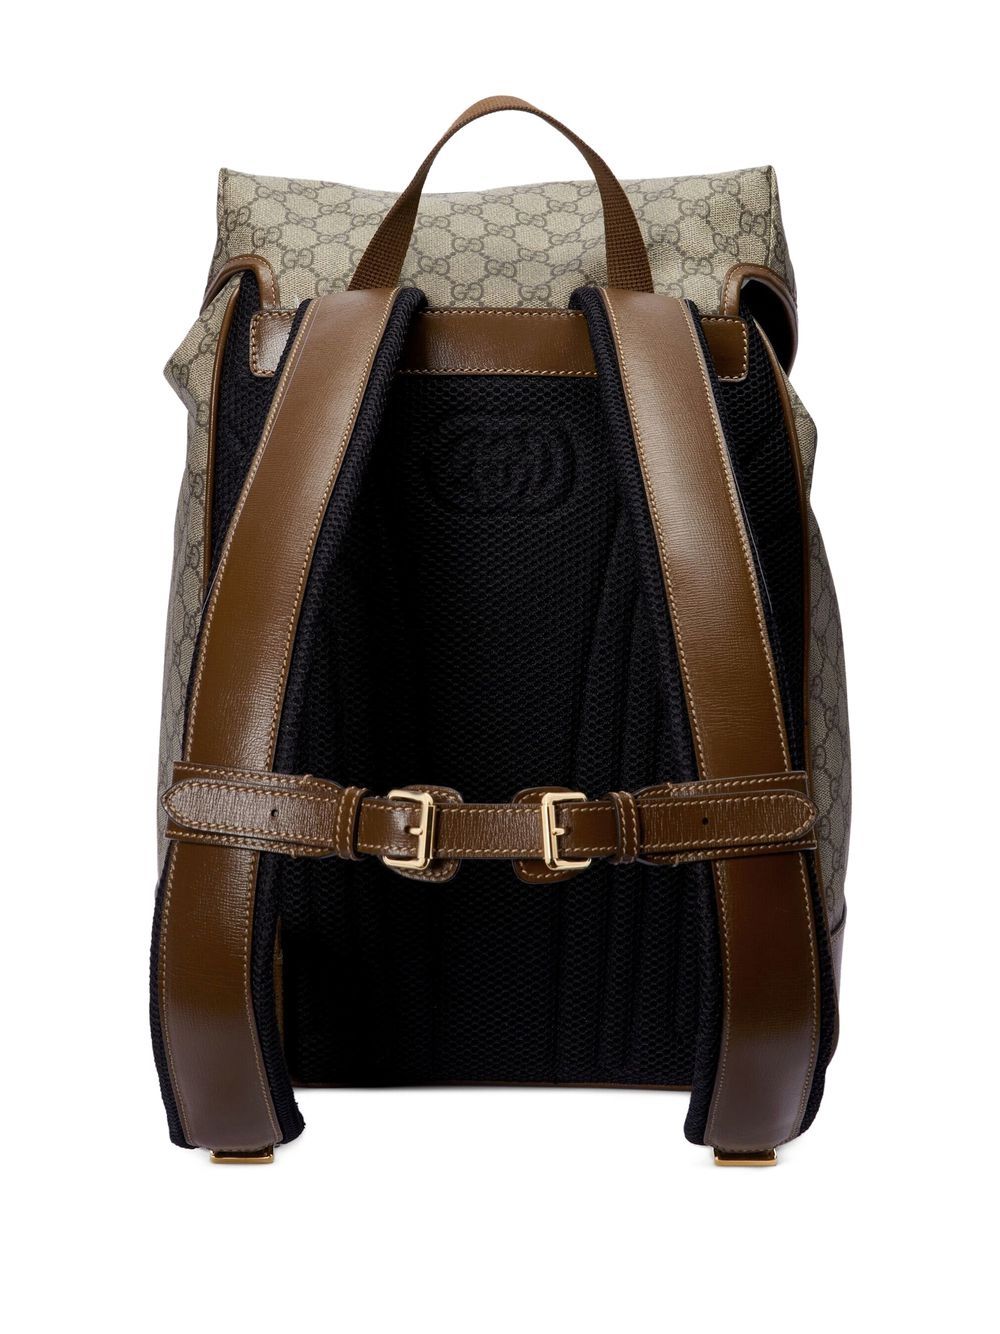 Gucci Gg-supreme Canvas And Leather Backpack In Beige